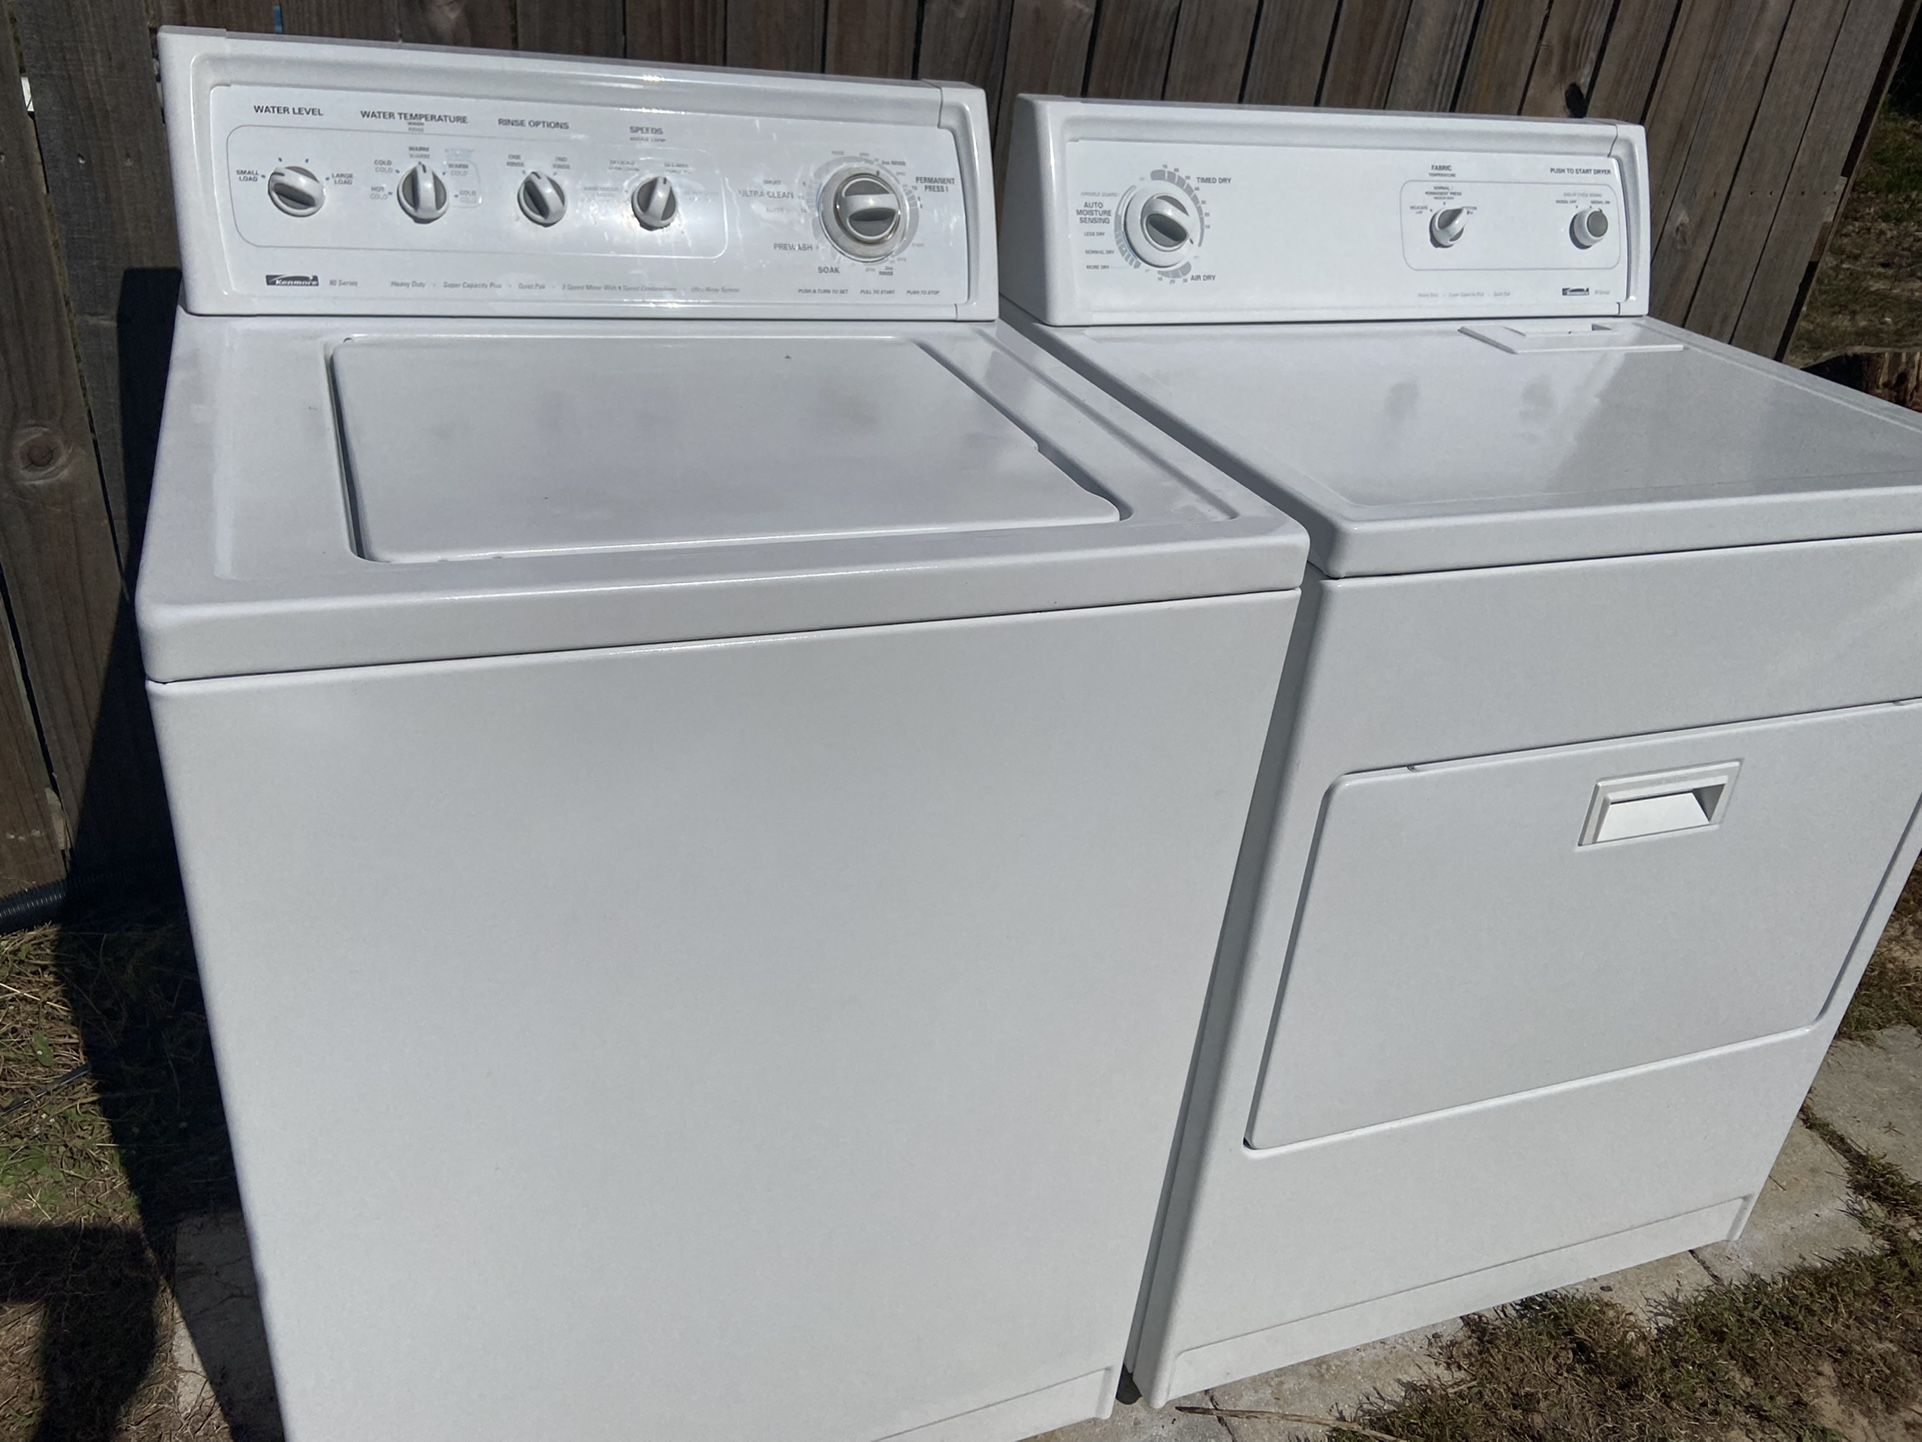 Matching Kenmore Washer And Dryer 